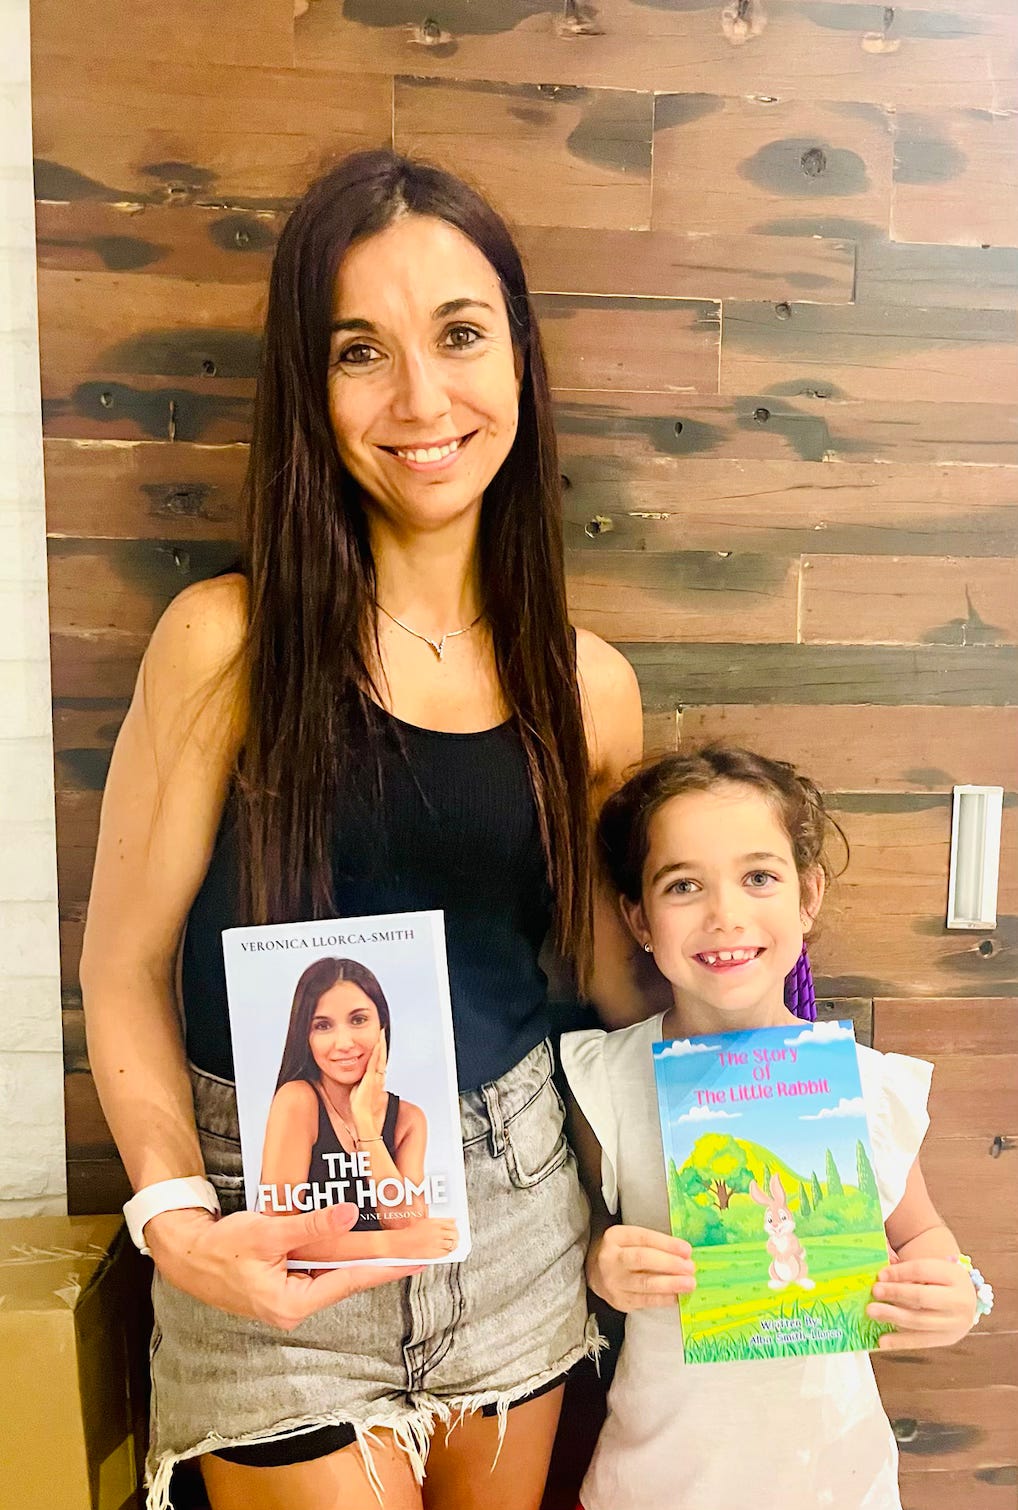 Picture of myself with a black top holding my book and Alba, a 6-year old holding her book. Both smiling at the camera. 